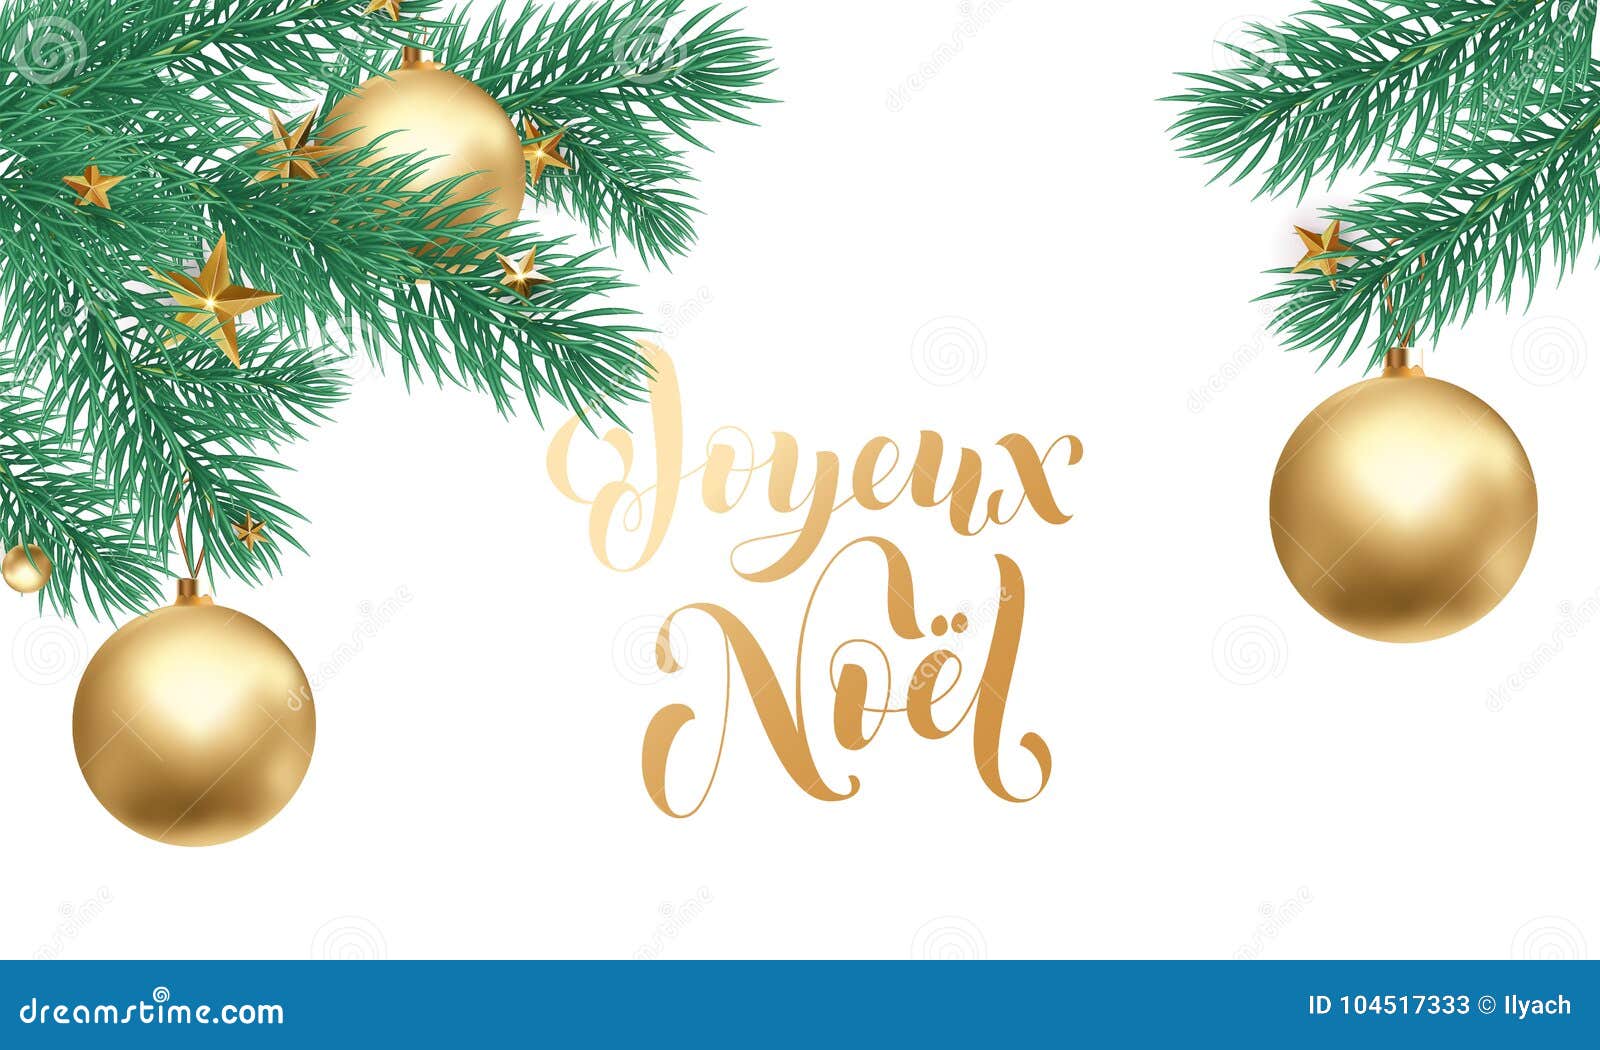 joyeux noel french merry christmas trendy golden calligraphy and fir branch wreath on white snow background for winter holiday des